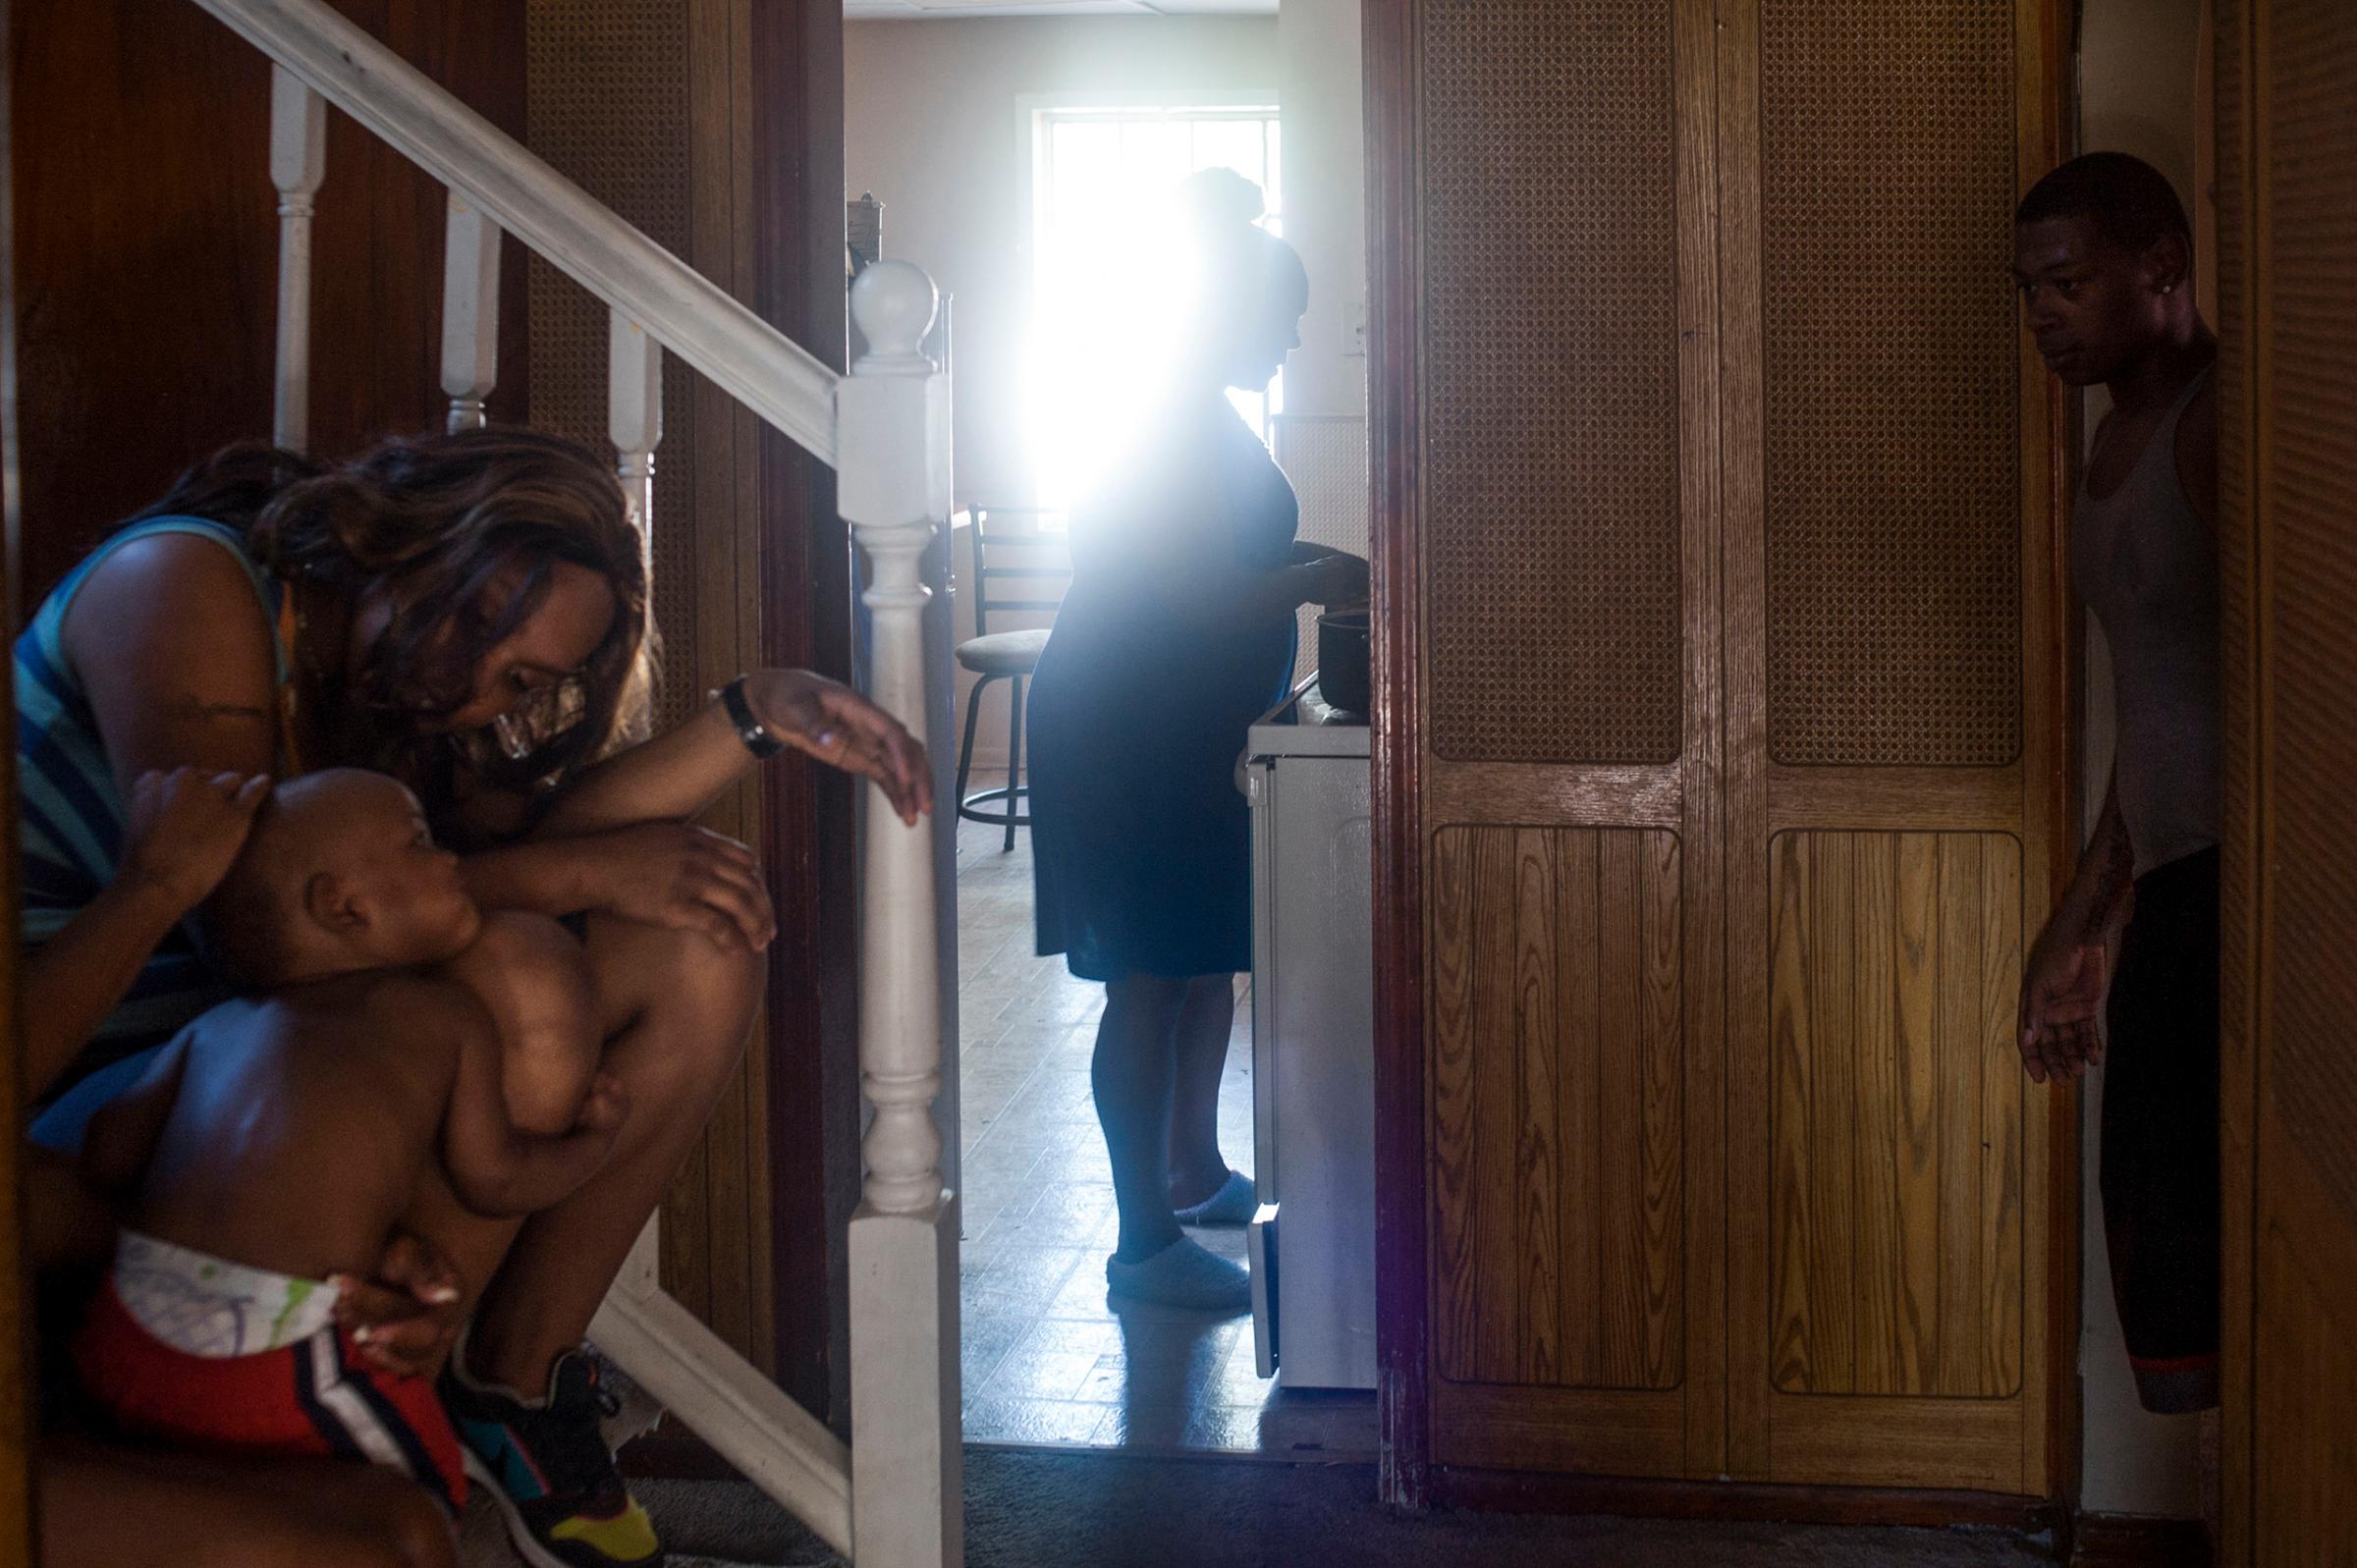 USA. Detroit, MI. 2012. Treasure's family at their home in Detroit. Shelley 'Treasure' Hilliard was murdered by a drug dealer after acting as a police informant following an arrest for marijuana possession. The police convinced her to act as an informant on her dealer and after she set him up, the police arrested him. They allegedly leaked her name to him for unclear reasons and released him several hours later. Within hours, Treasure was dead. Her case is part of a rash of murders of police informants as law enforcement increasingly relies on their use to apprehend criminals without exercising due diligence to protect them from revenge killings.